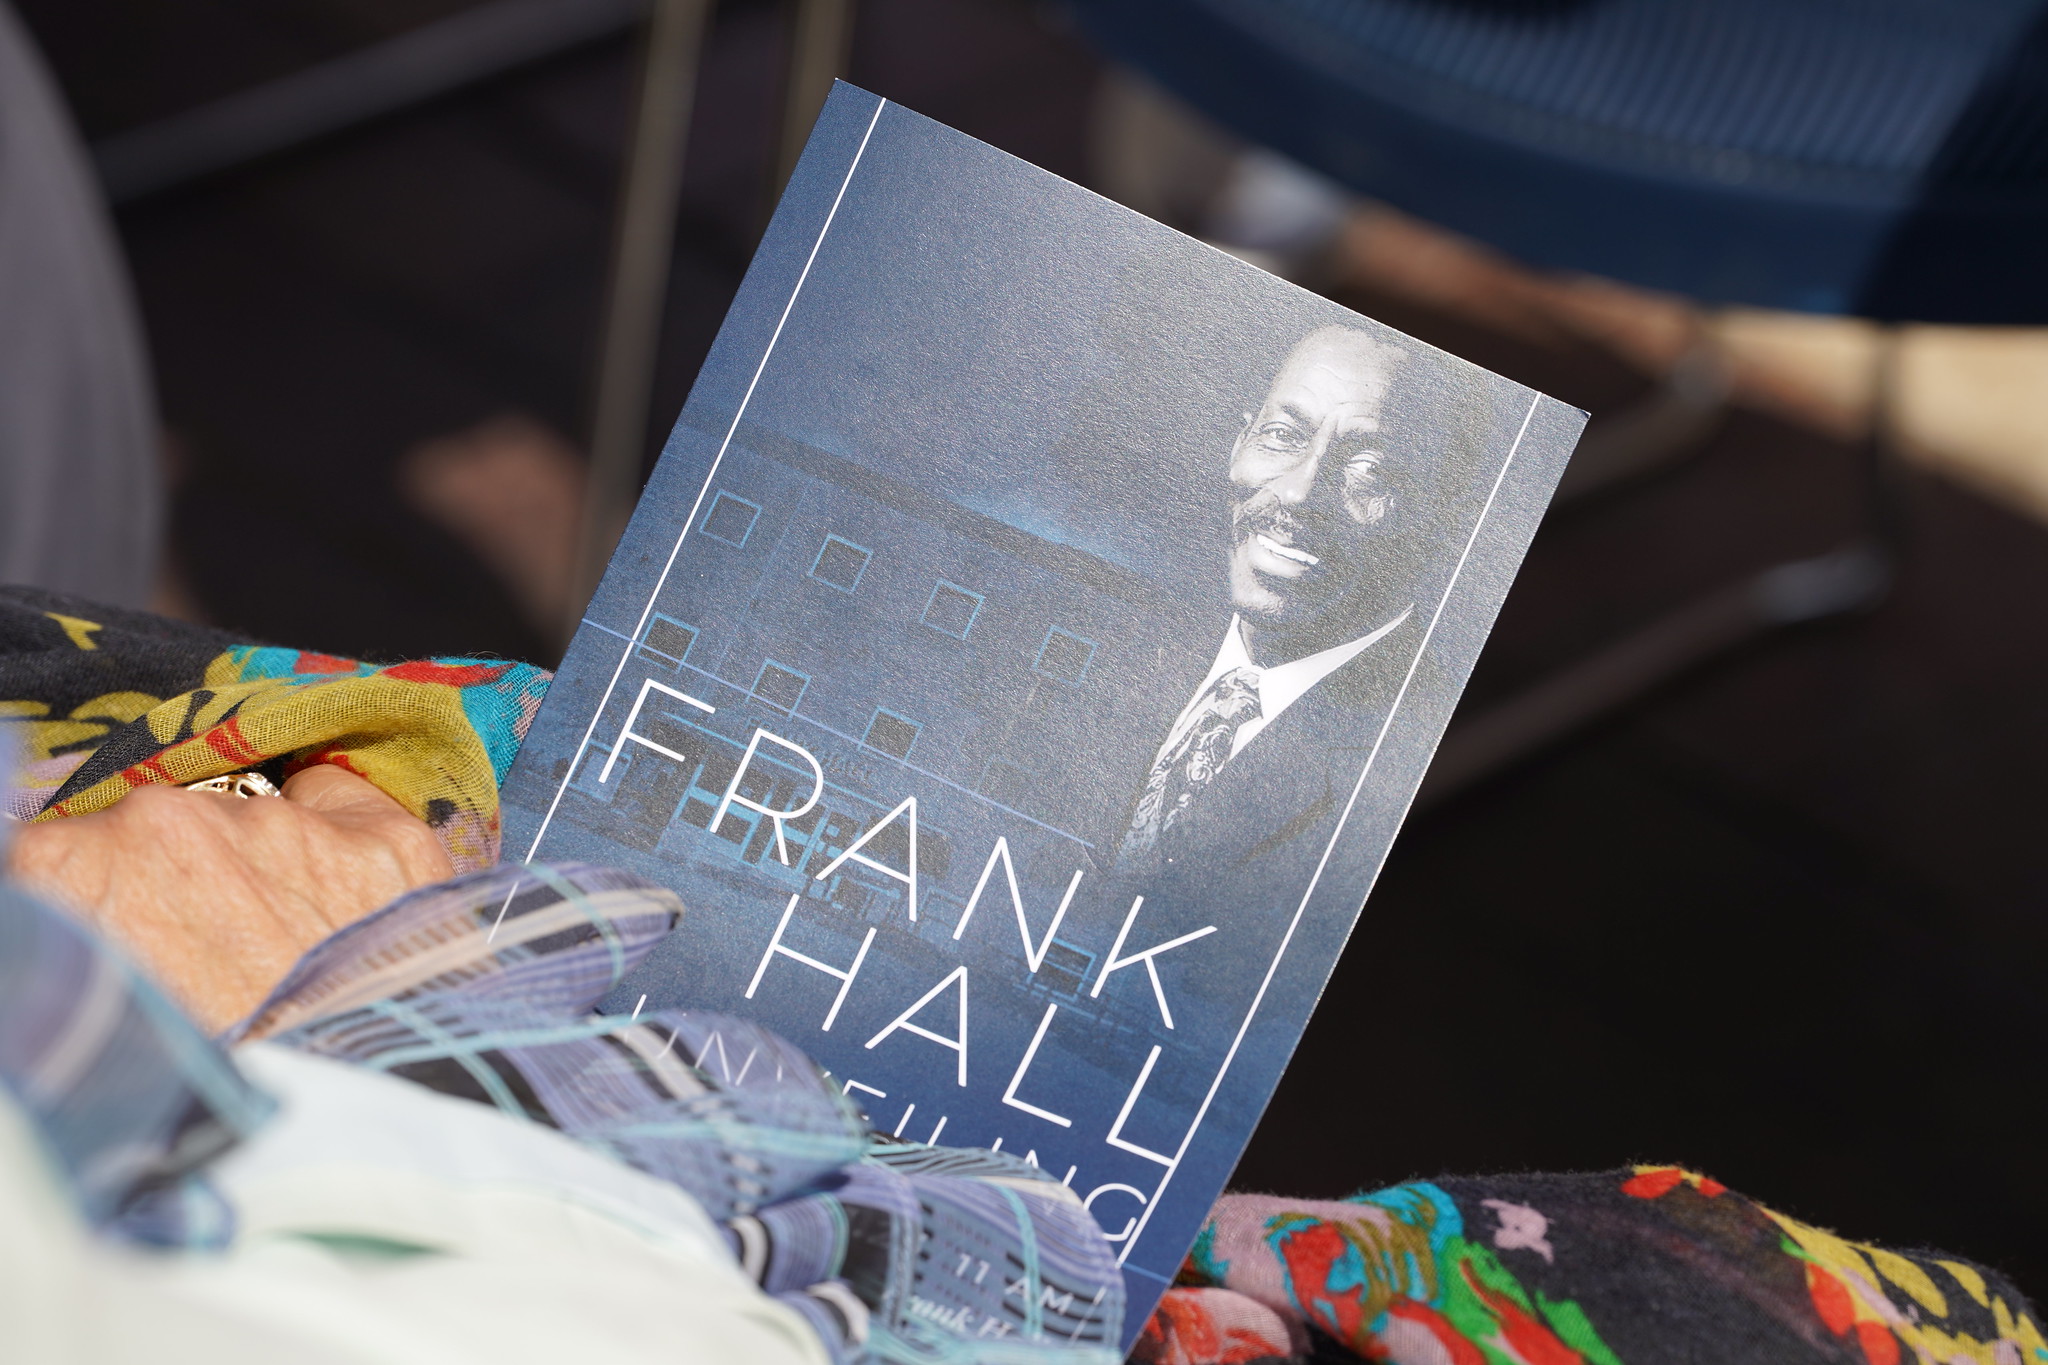 Lincoln University renamed Founders Hall to Dr. James Frank Hall to honor the former university president's legacy and commemorate his devotion to his alma mater with a tribute to his life's work.